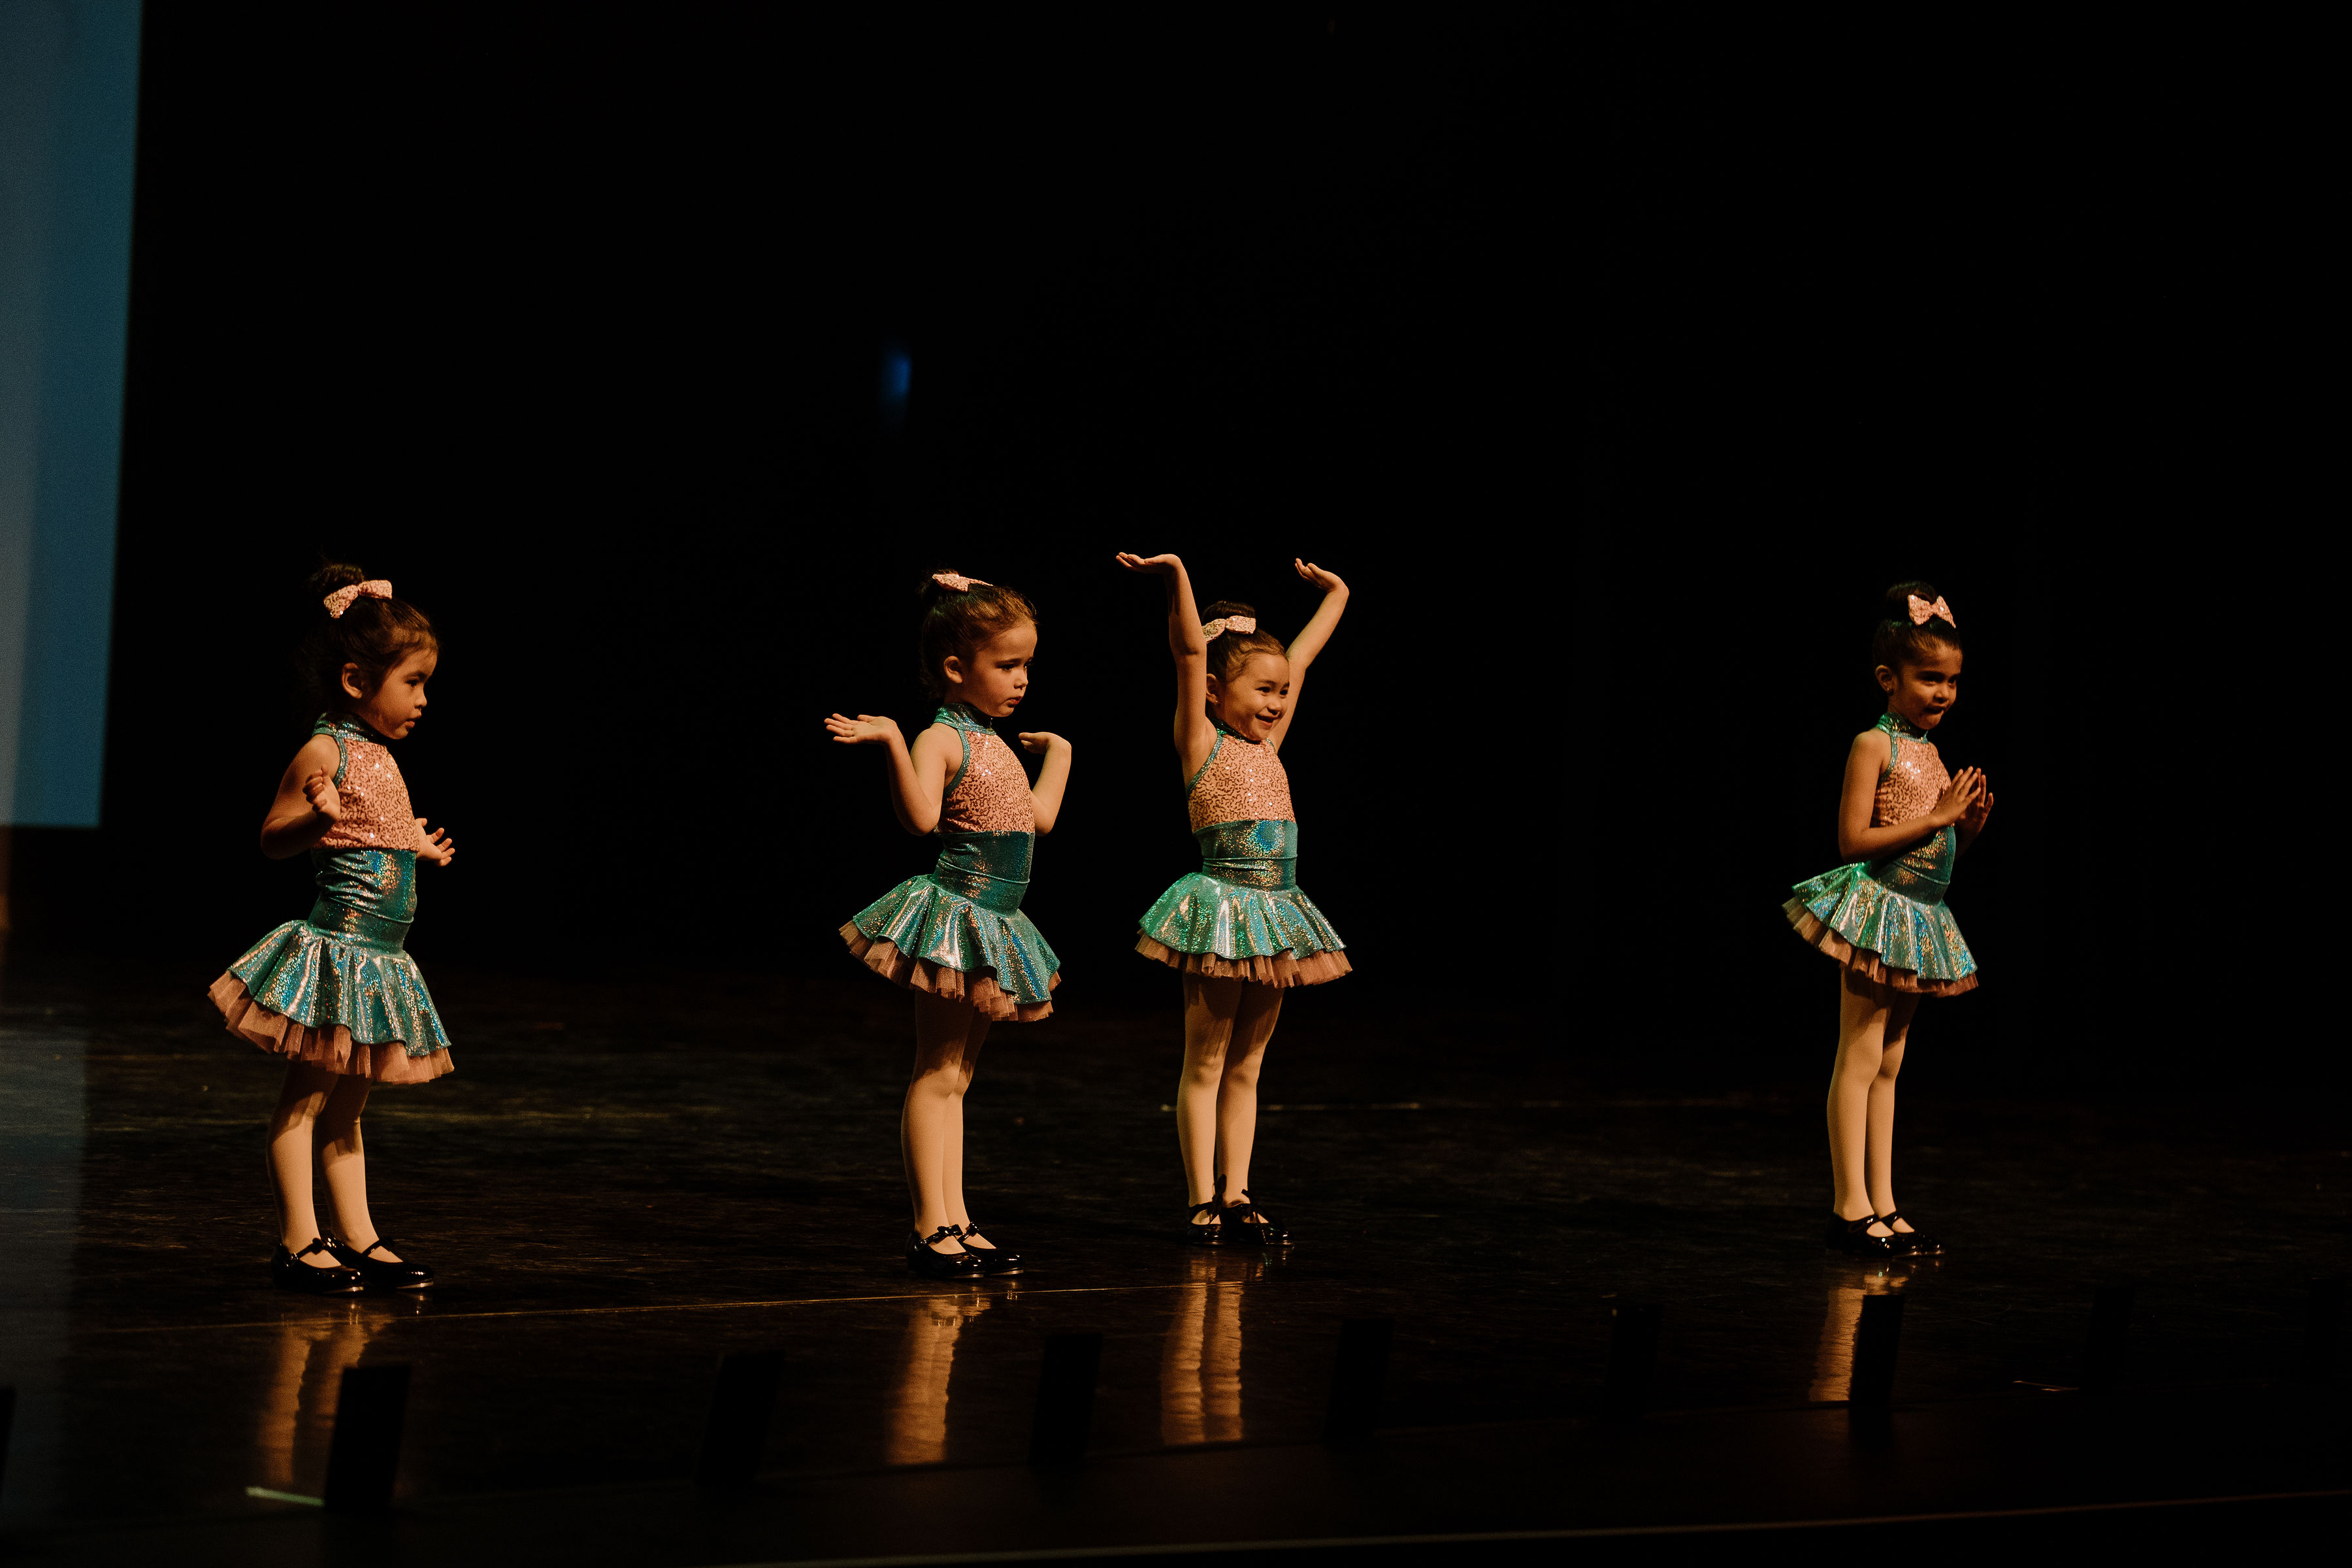 Four dancers performing tap dance on stage